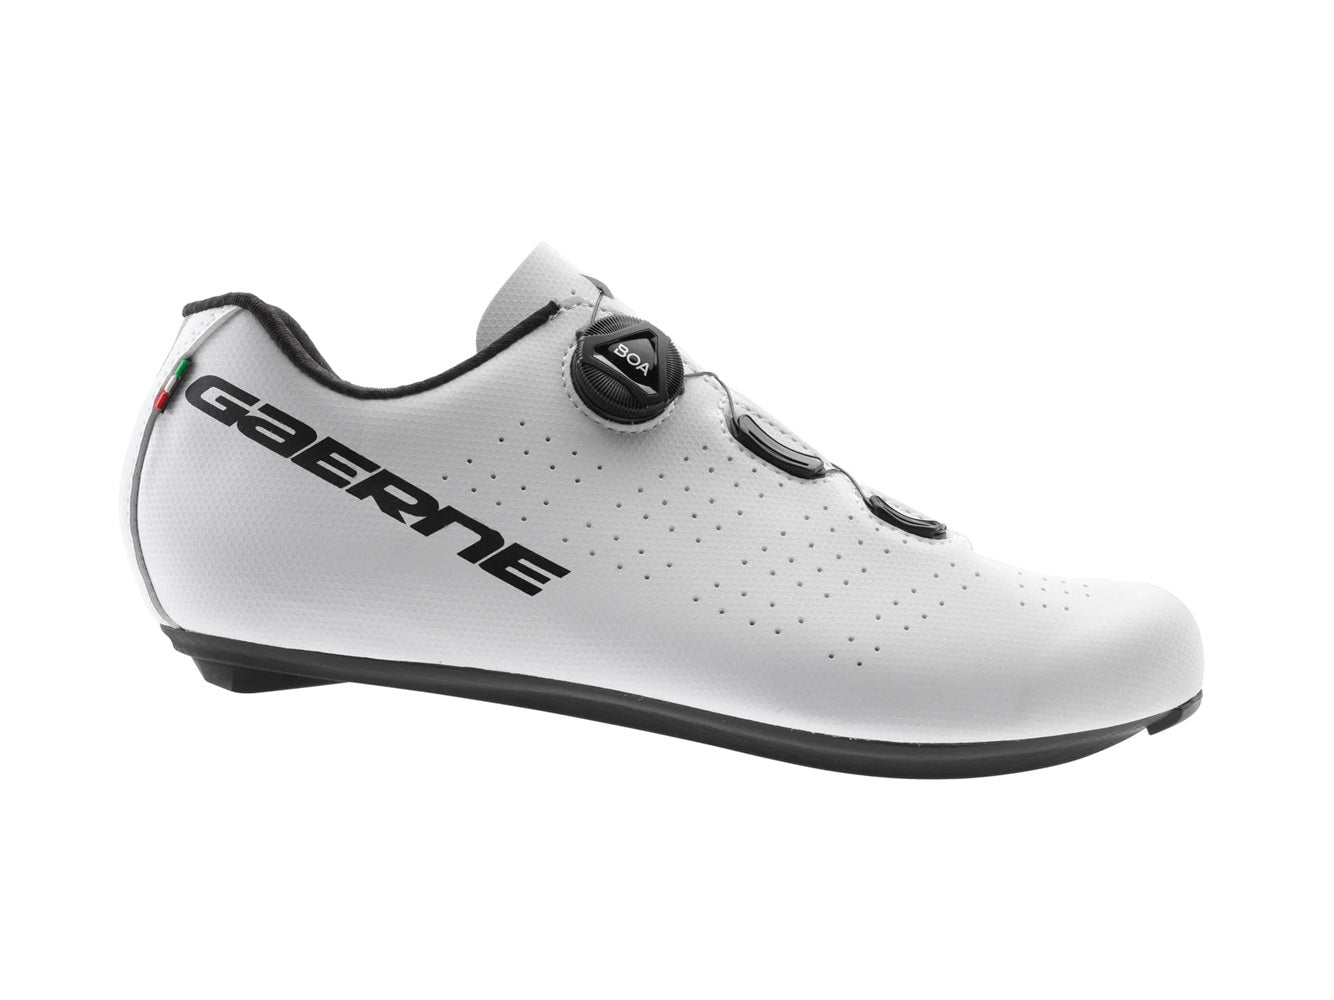 GAERNE G. SPRINT Cycling Road Shoes - White 3654-004